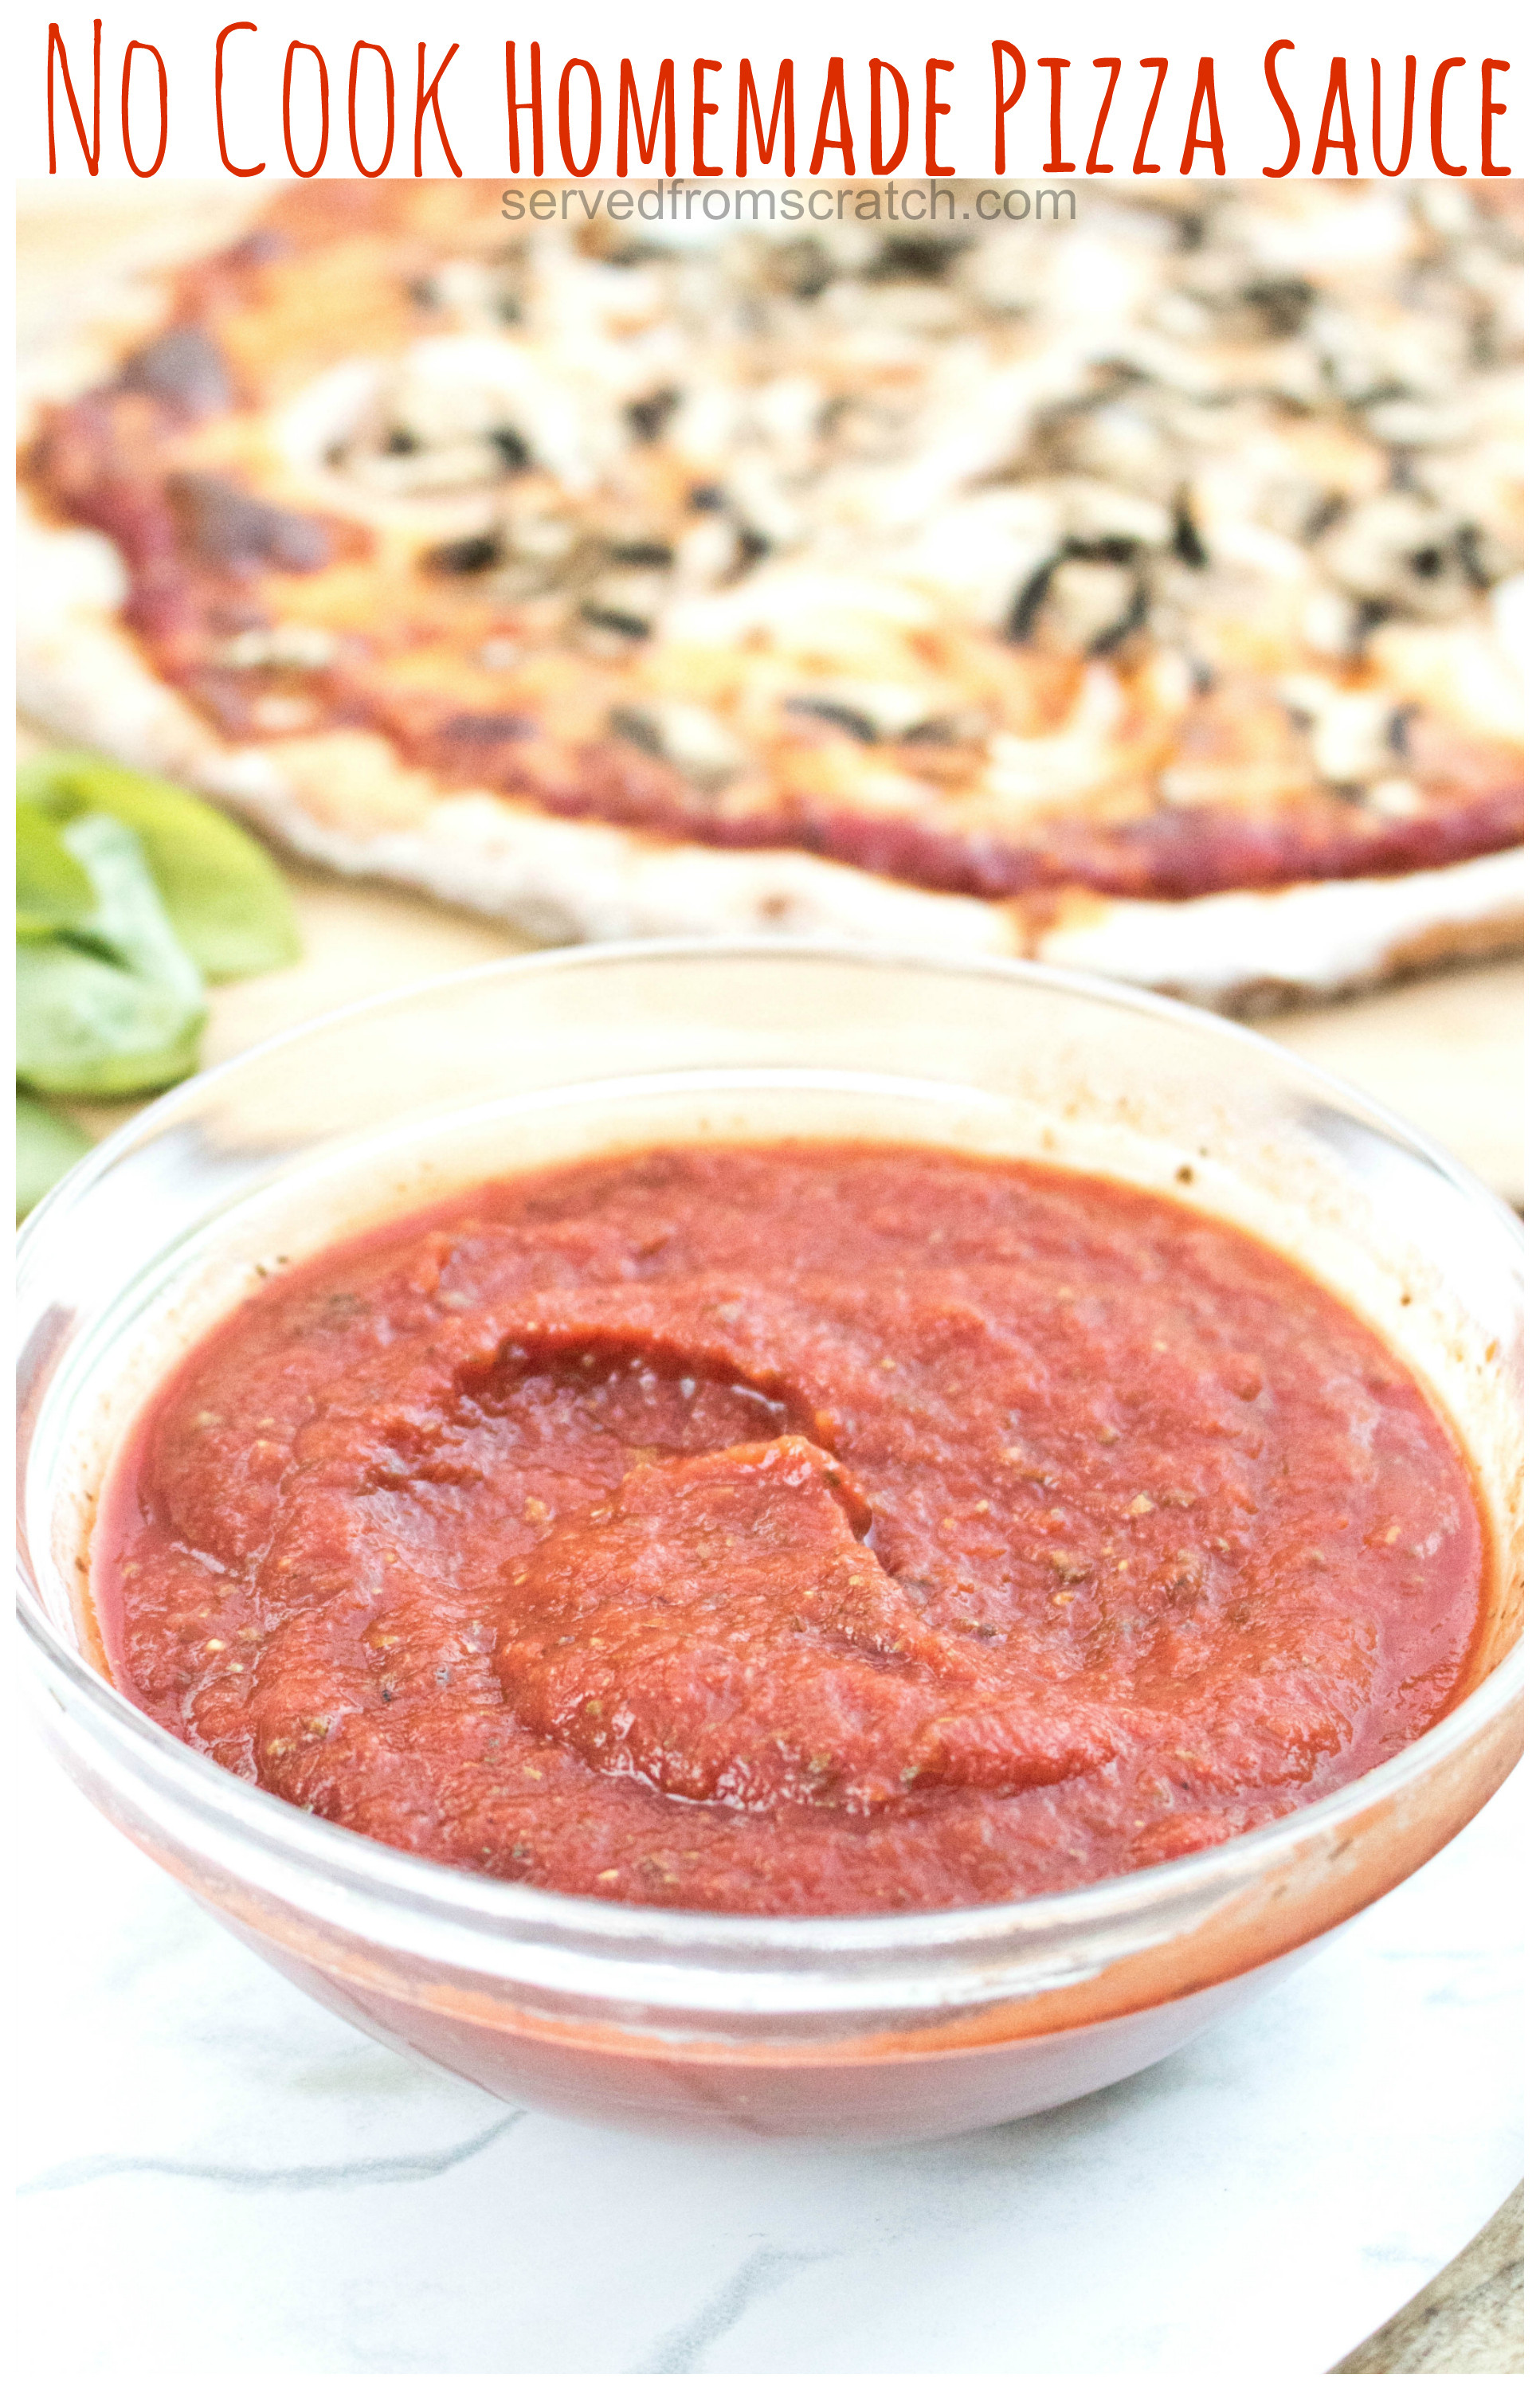 Homemade Pizza Sauce From Scratch
 No Cook Homemade Pizza Sauce Served From Scratch